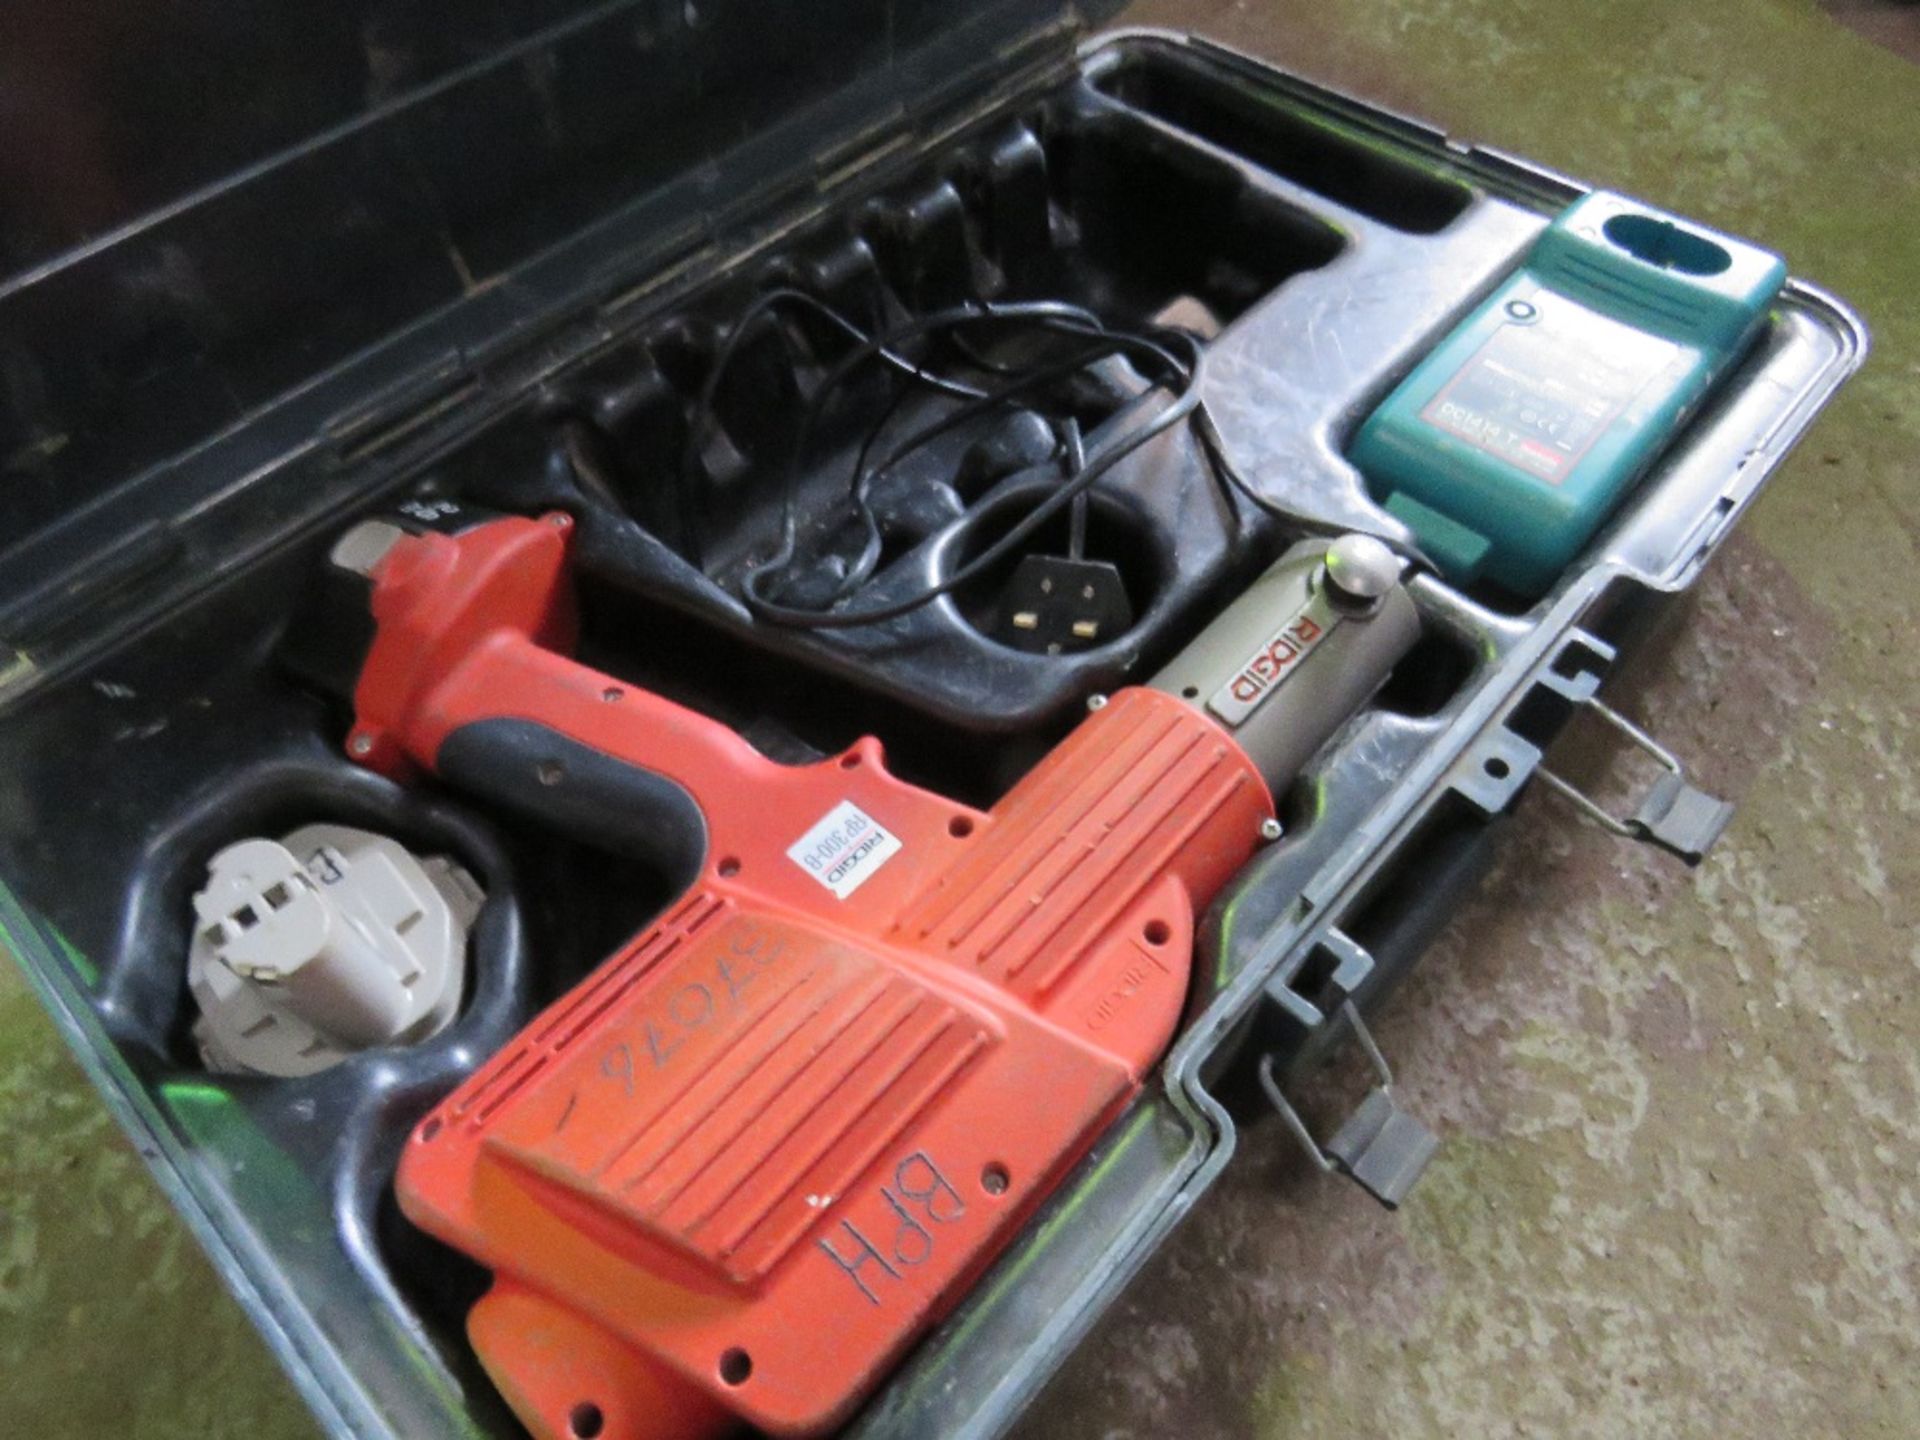 RIDGID RP300-B BATTERY POWERED CRIMPING GUN. NO HEADS. UNTESTED, CONDITION UNKNOWN. - Image 2 of 3